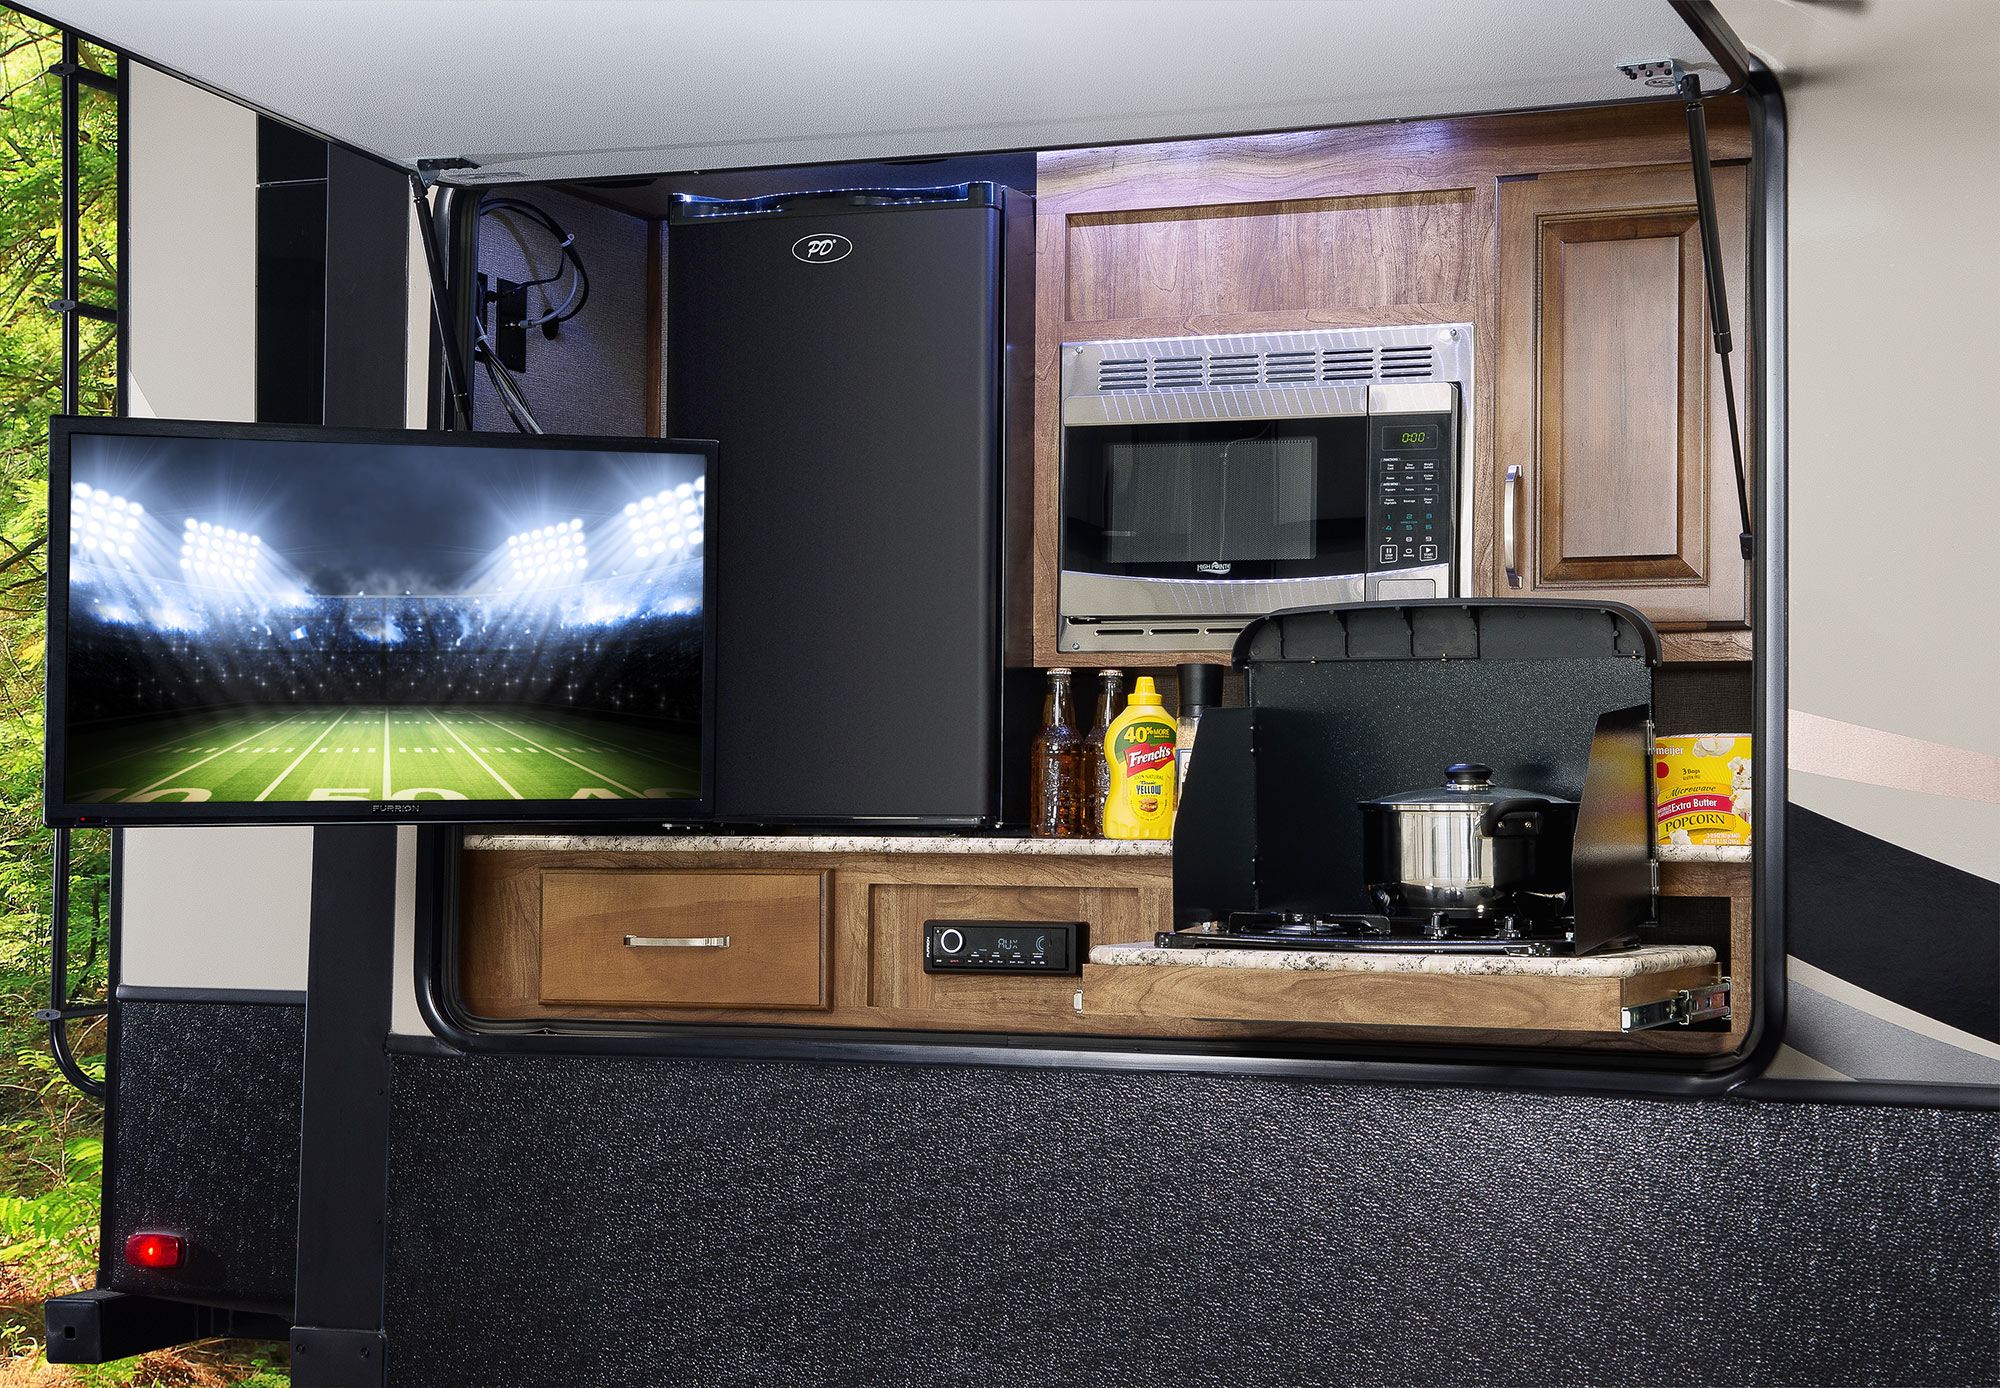 travel trailers with outdoor kitchens